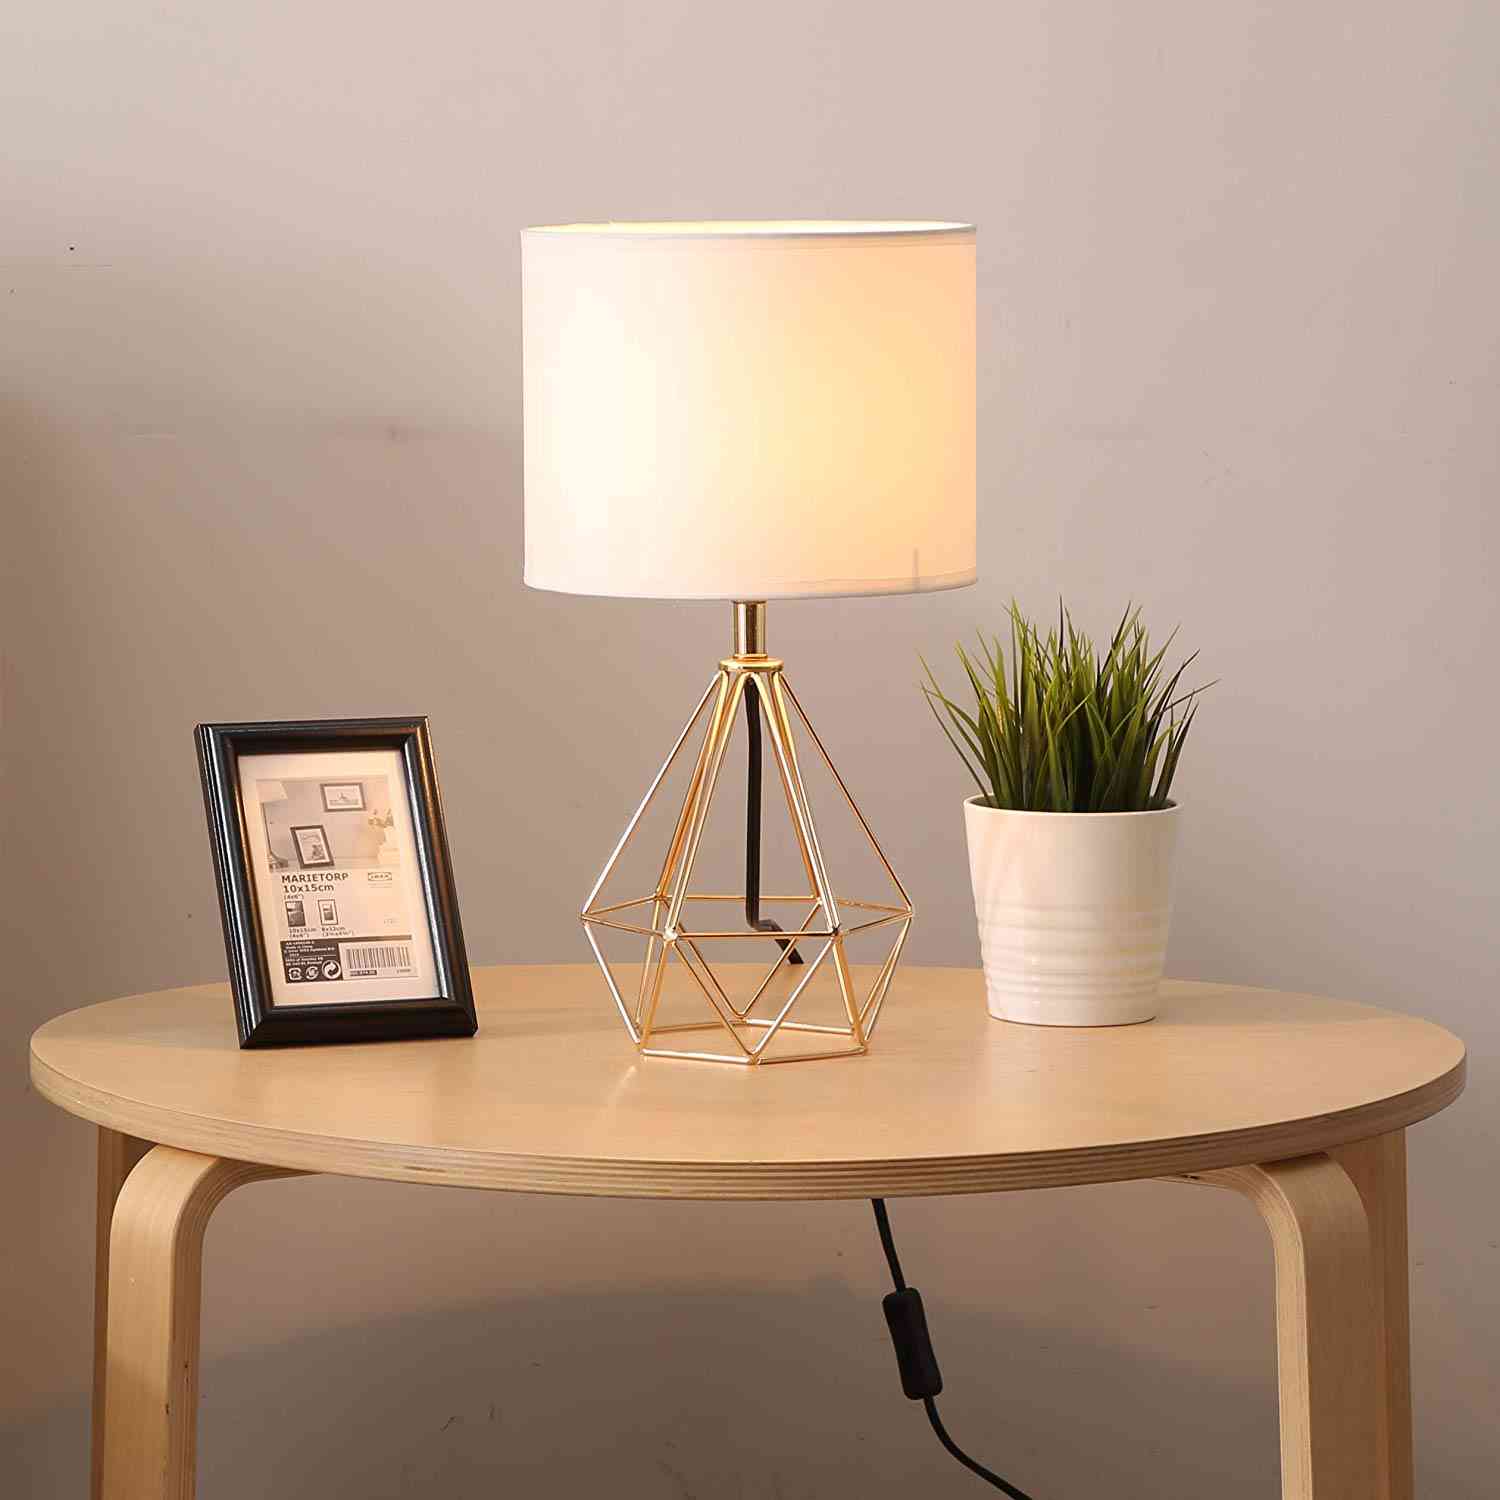 Decorative Retro Geometric Table Lamp - Drum Shade Bedside Lighting For Bedroom And Living Study